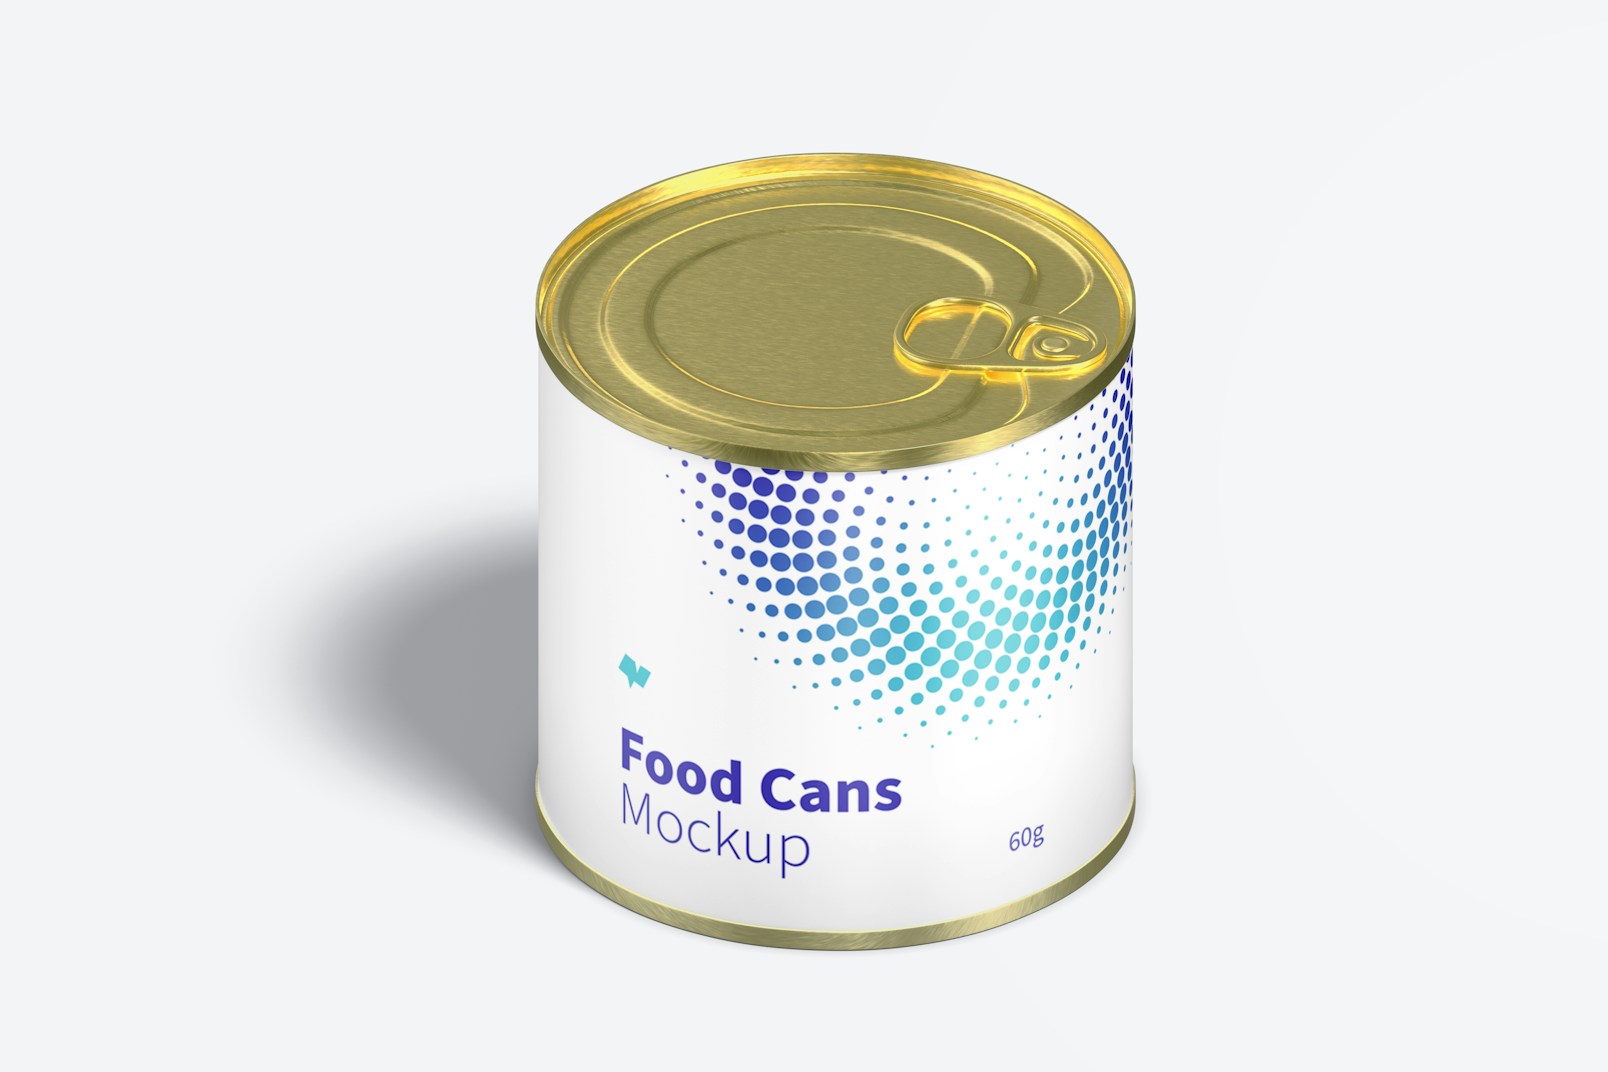 60g Food Can Mockup, Isometric View